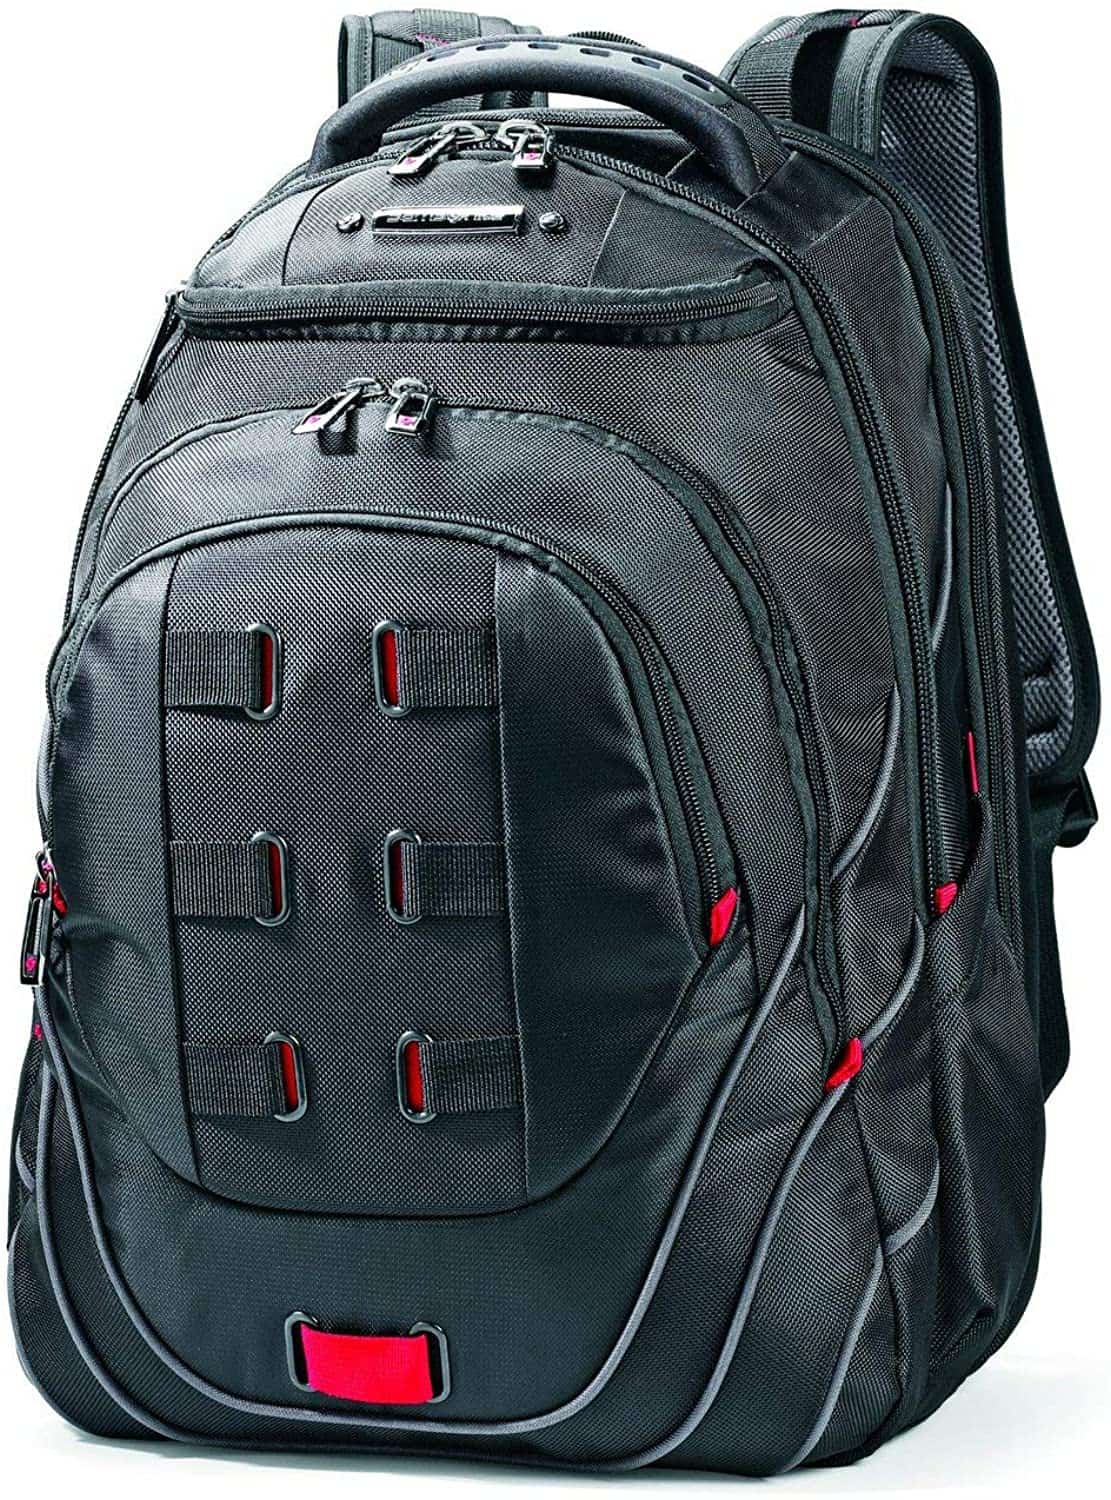 13 Best Backpacks with Trolley Sleeve in 2021